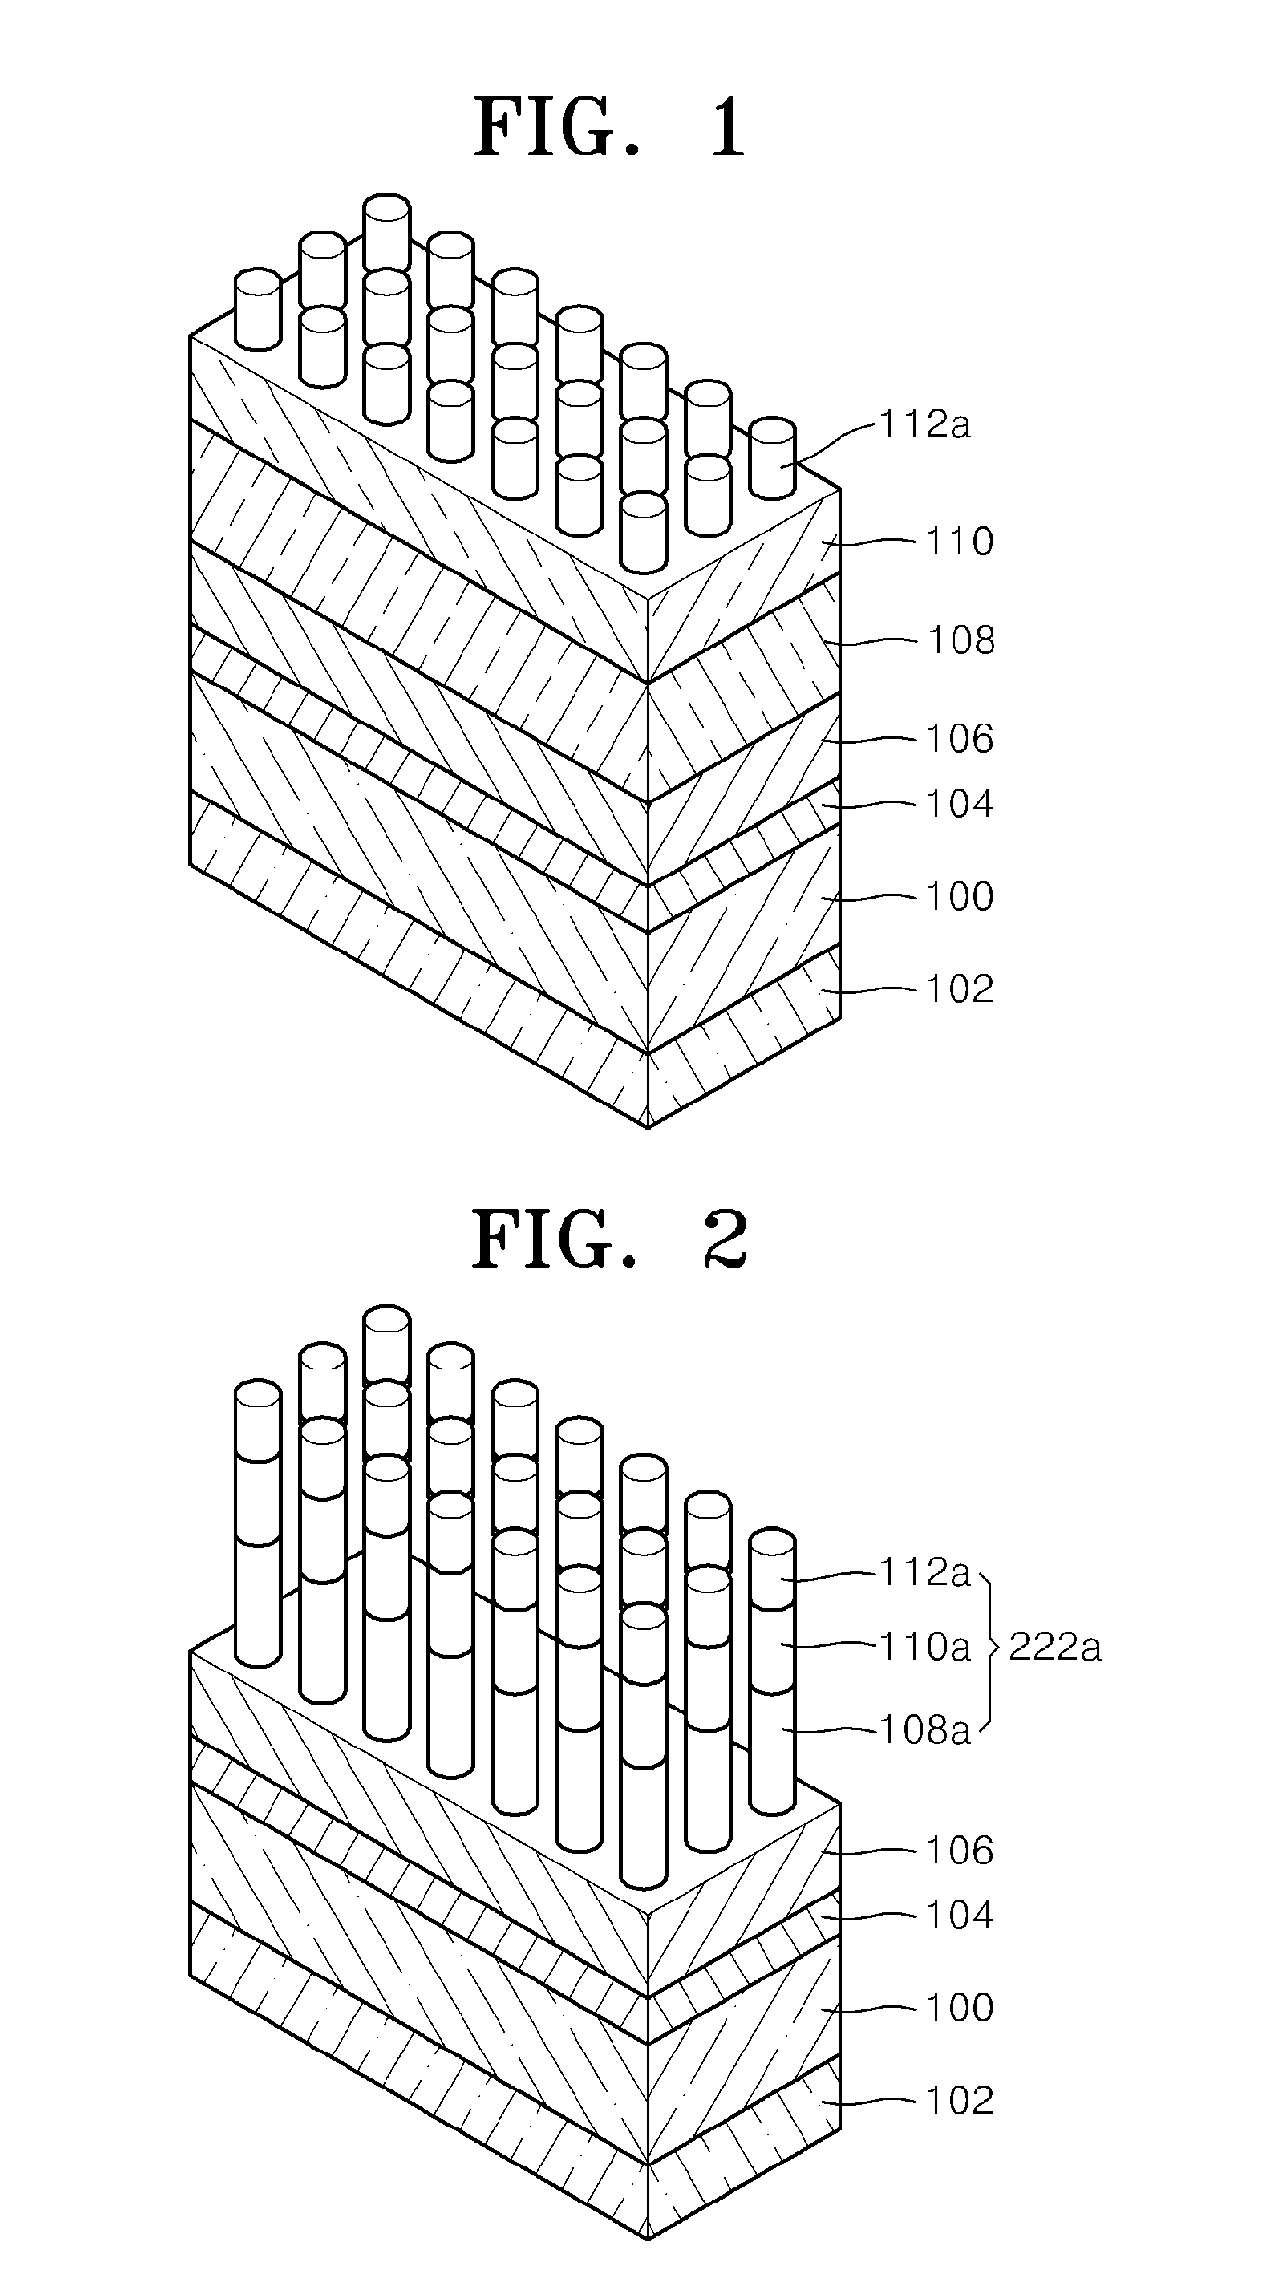 Silicon-Based Light Emitting Diode for Enhancing Light Extraction Efficiency and Method of Fabricating the Same